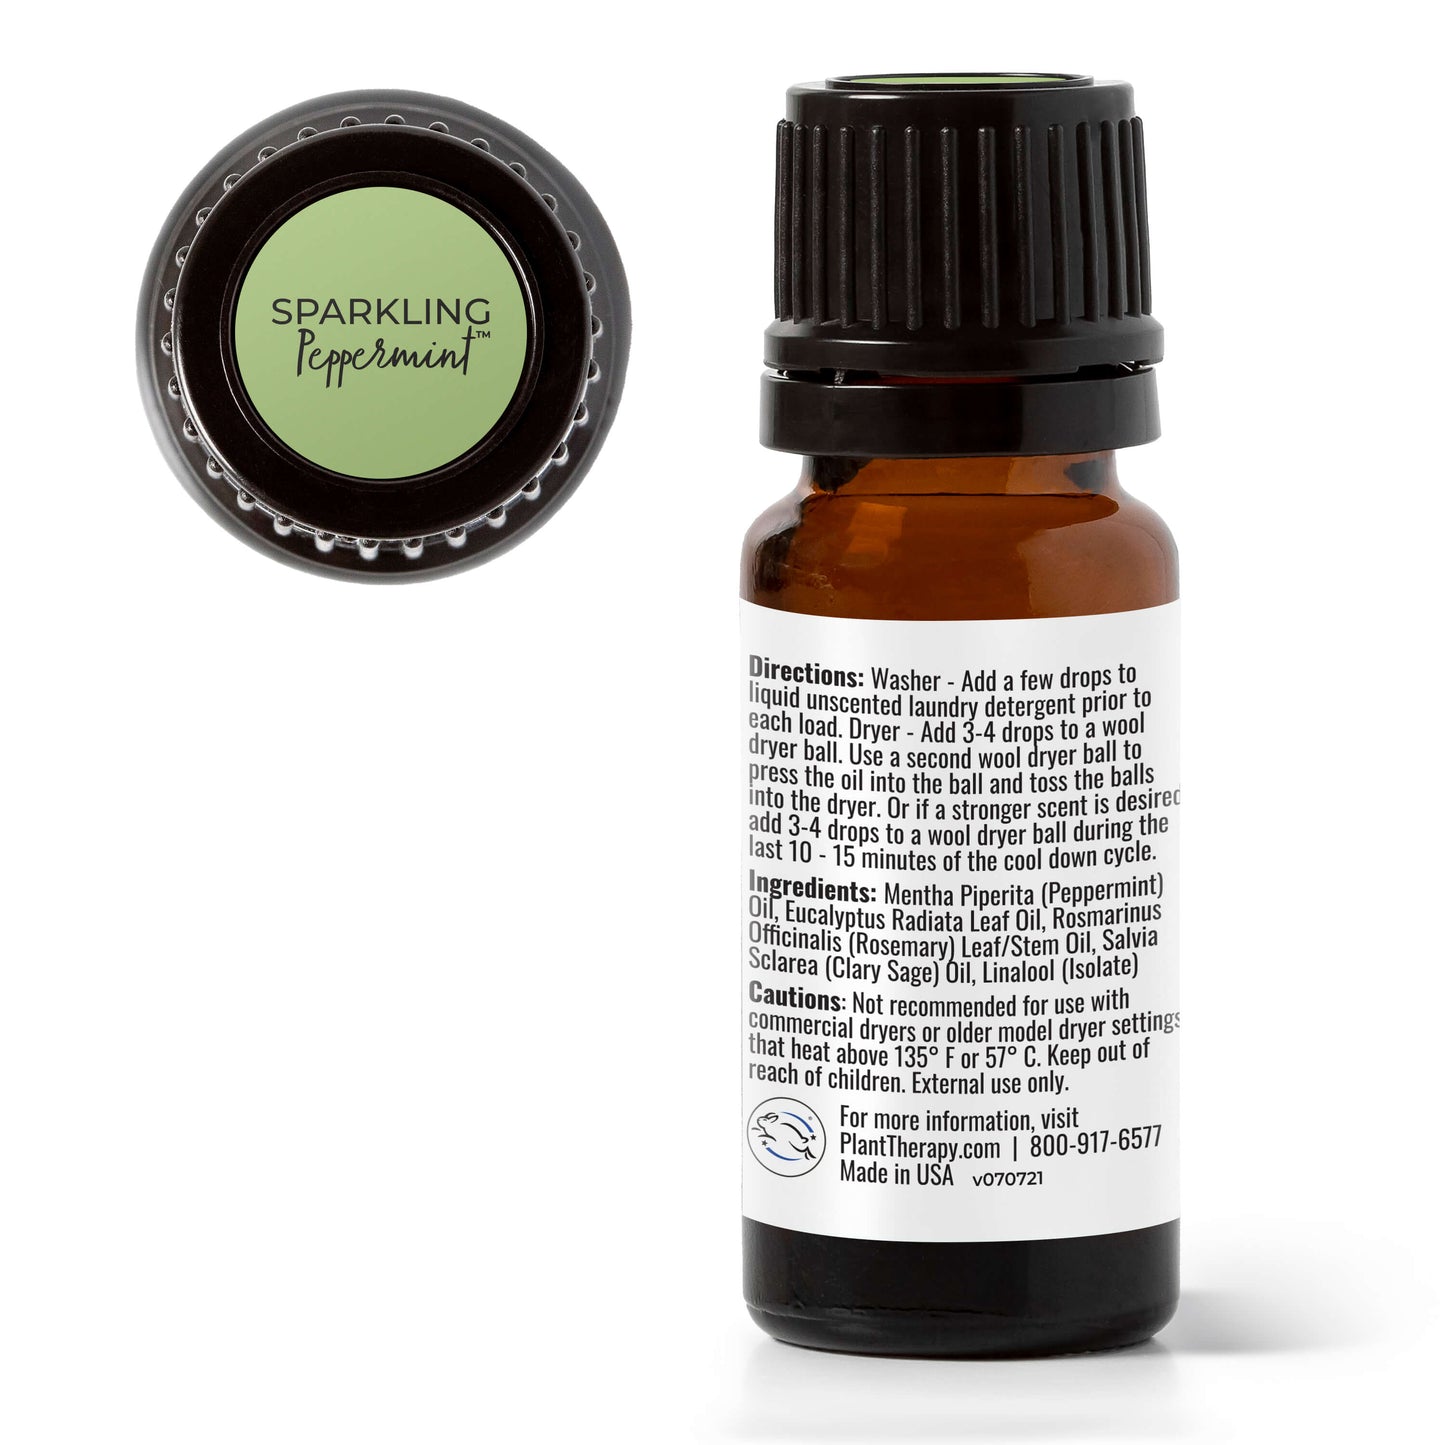 Sparkling Peppermint Laundry Essential Oil Blend